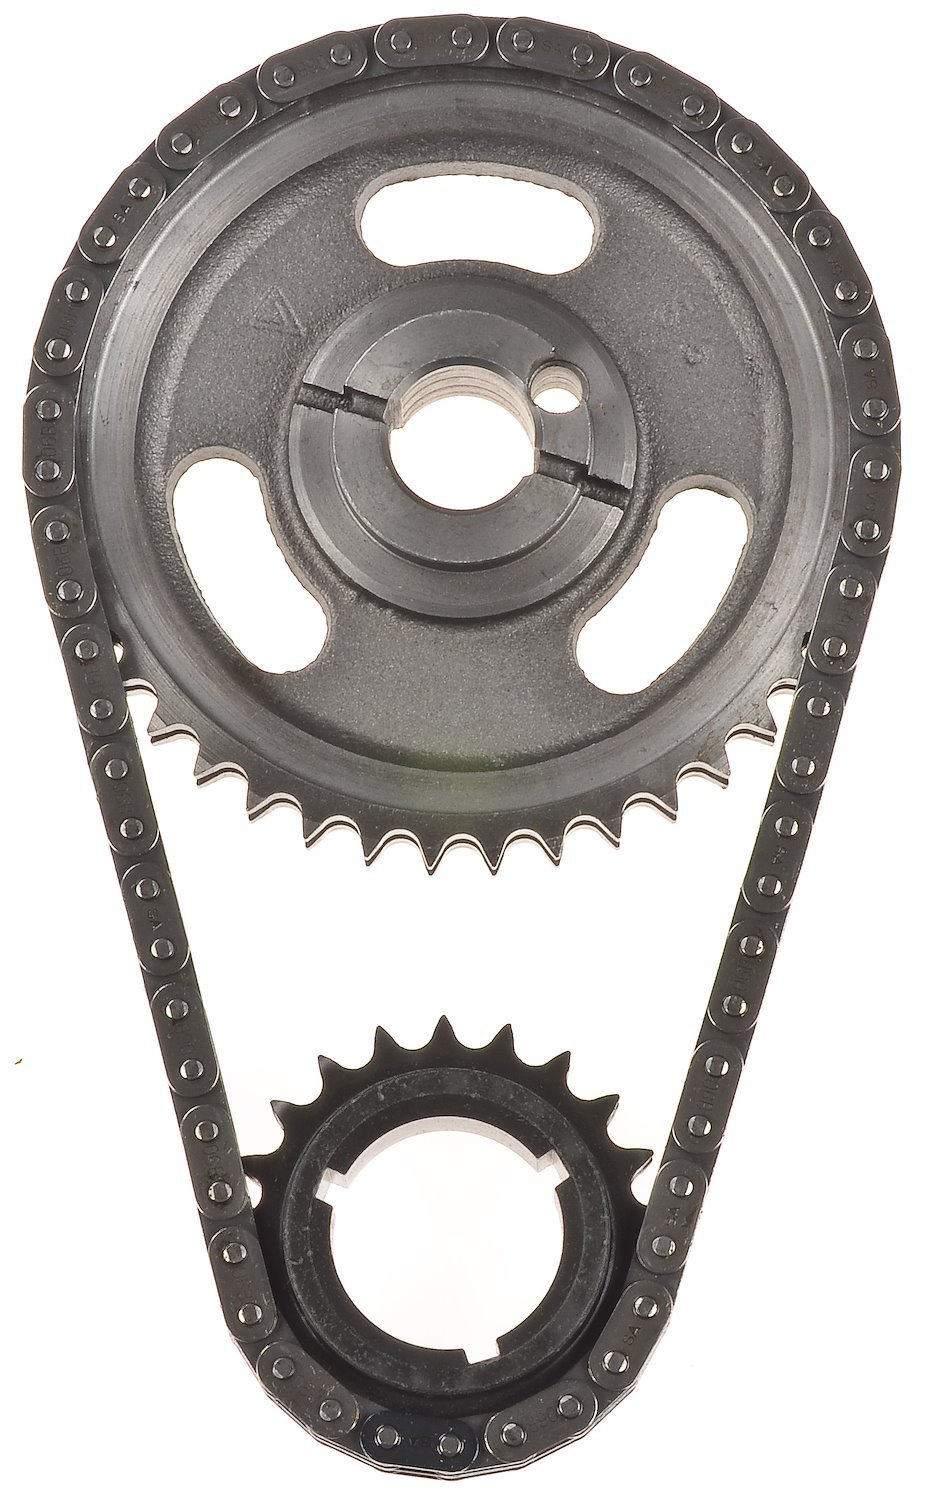 Timing Chain Set for 1972-2002 Small Block Ford 302-351W